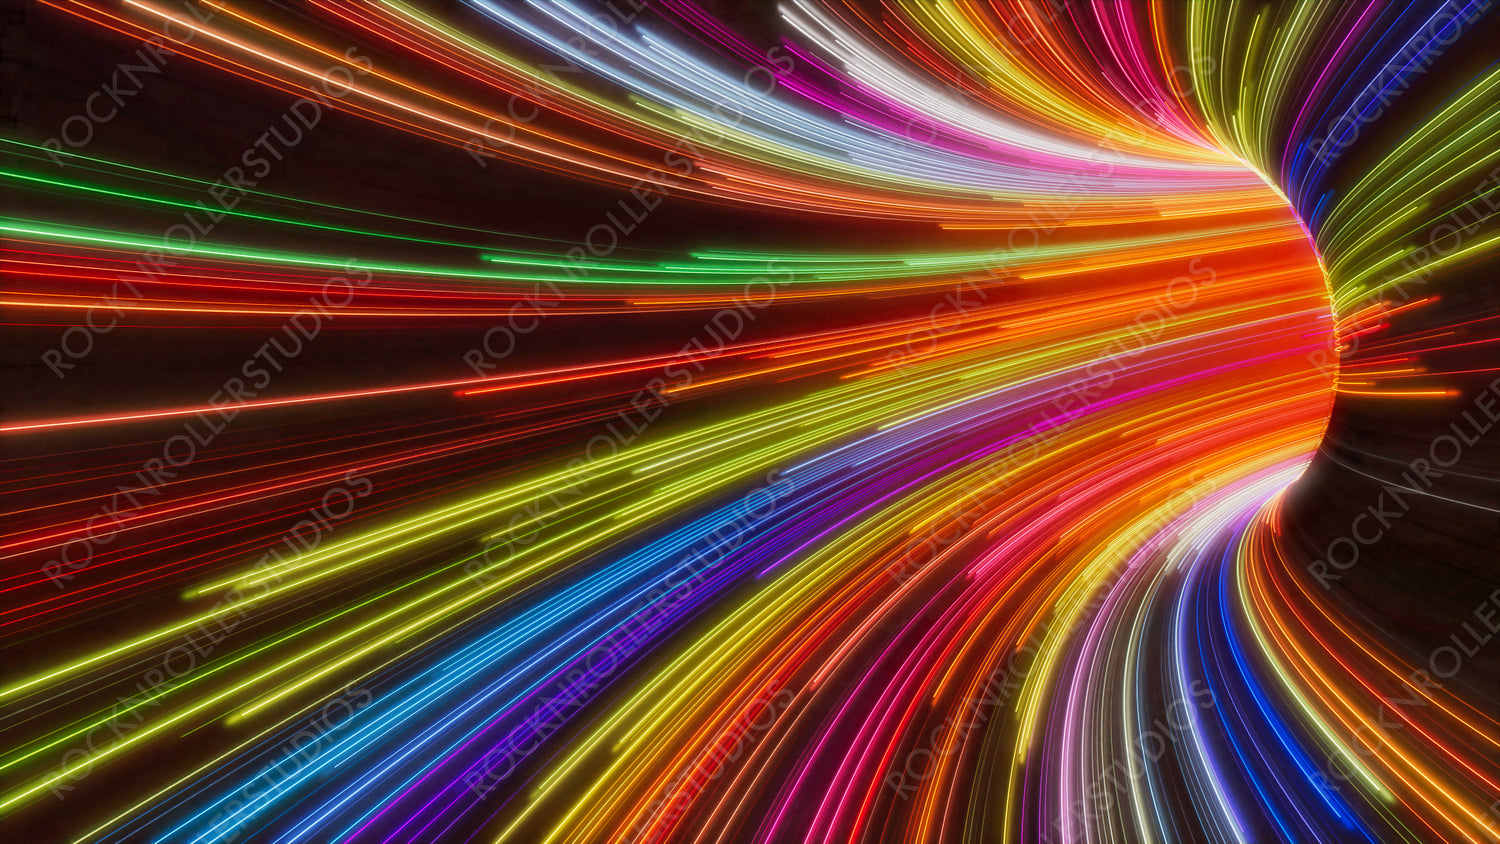 Wavy Swoosh Tunnel with Orange, Pink and Green Stripes. 3D Render.